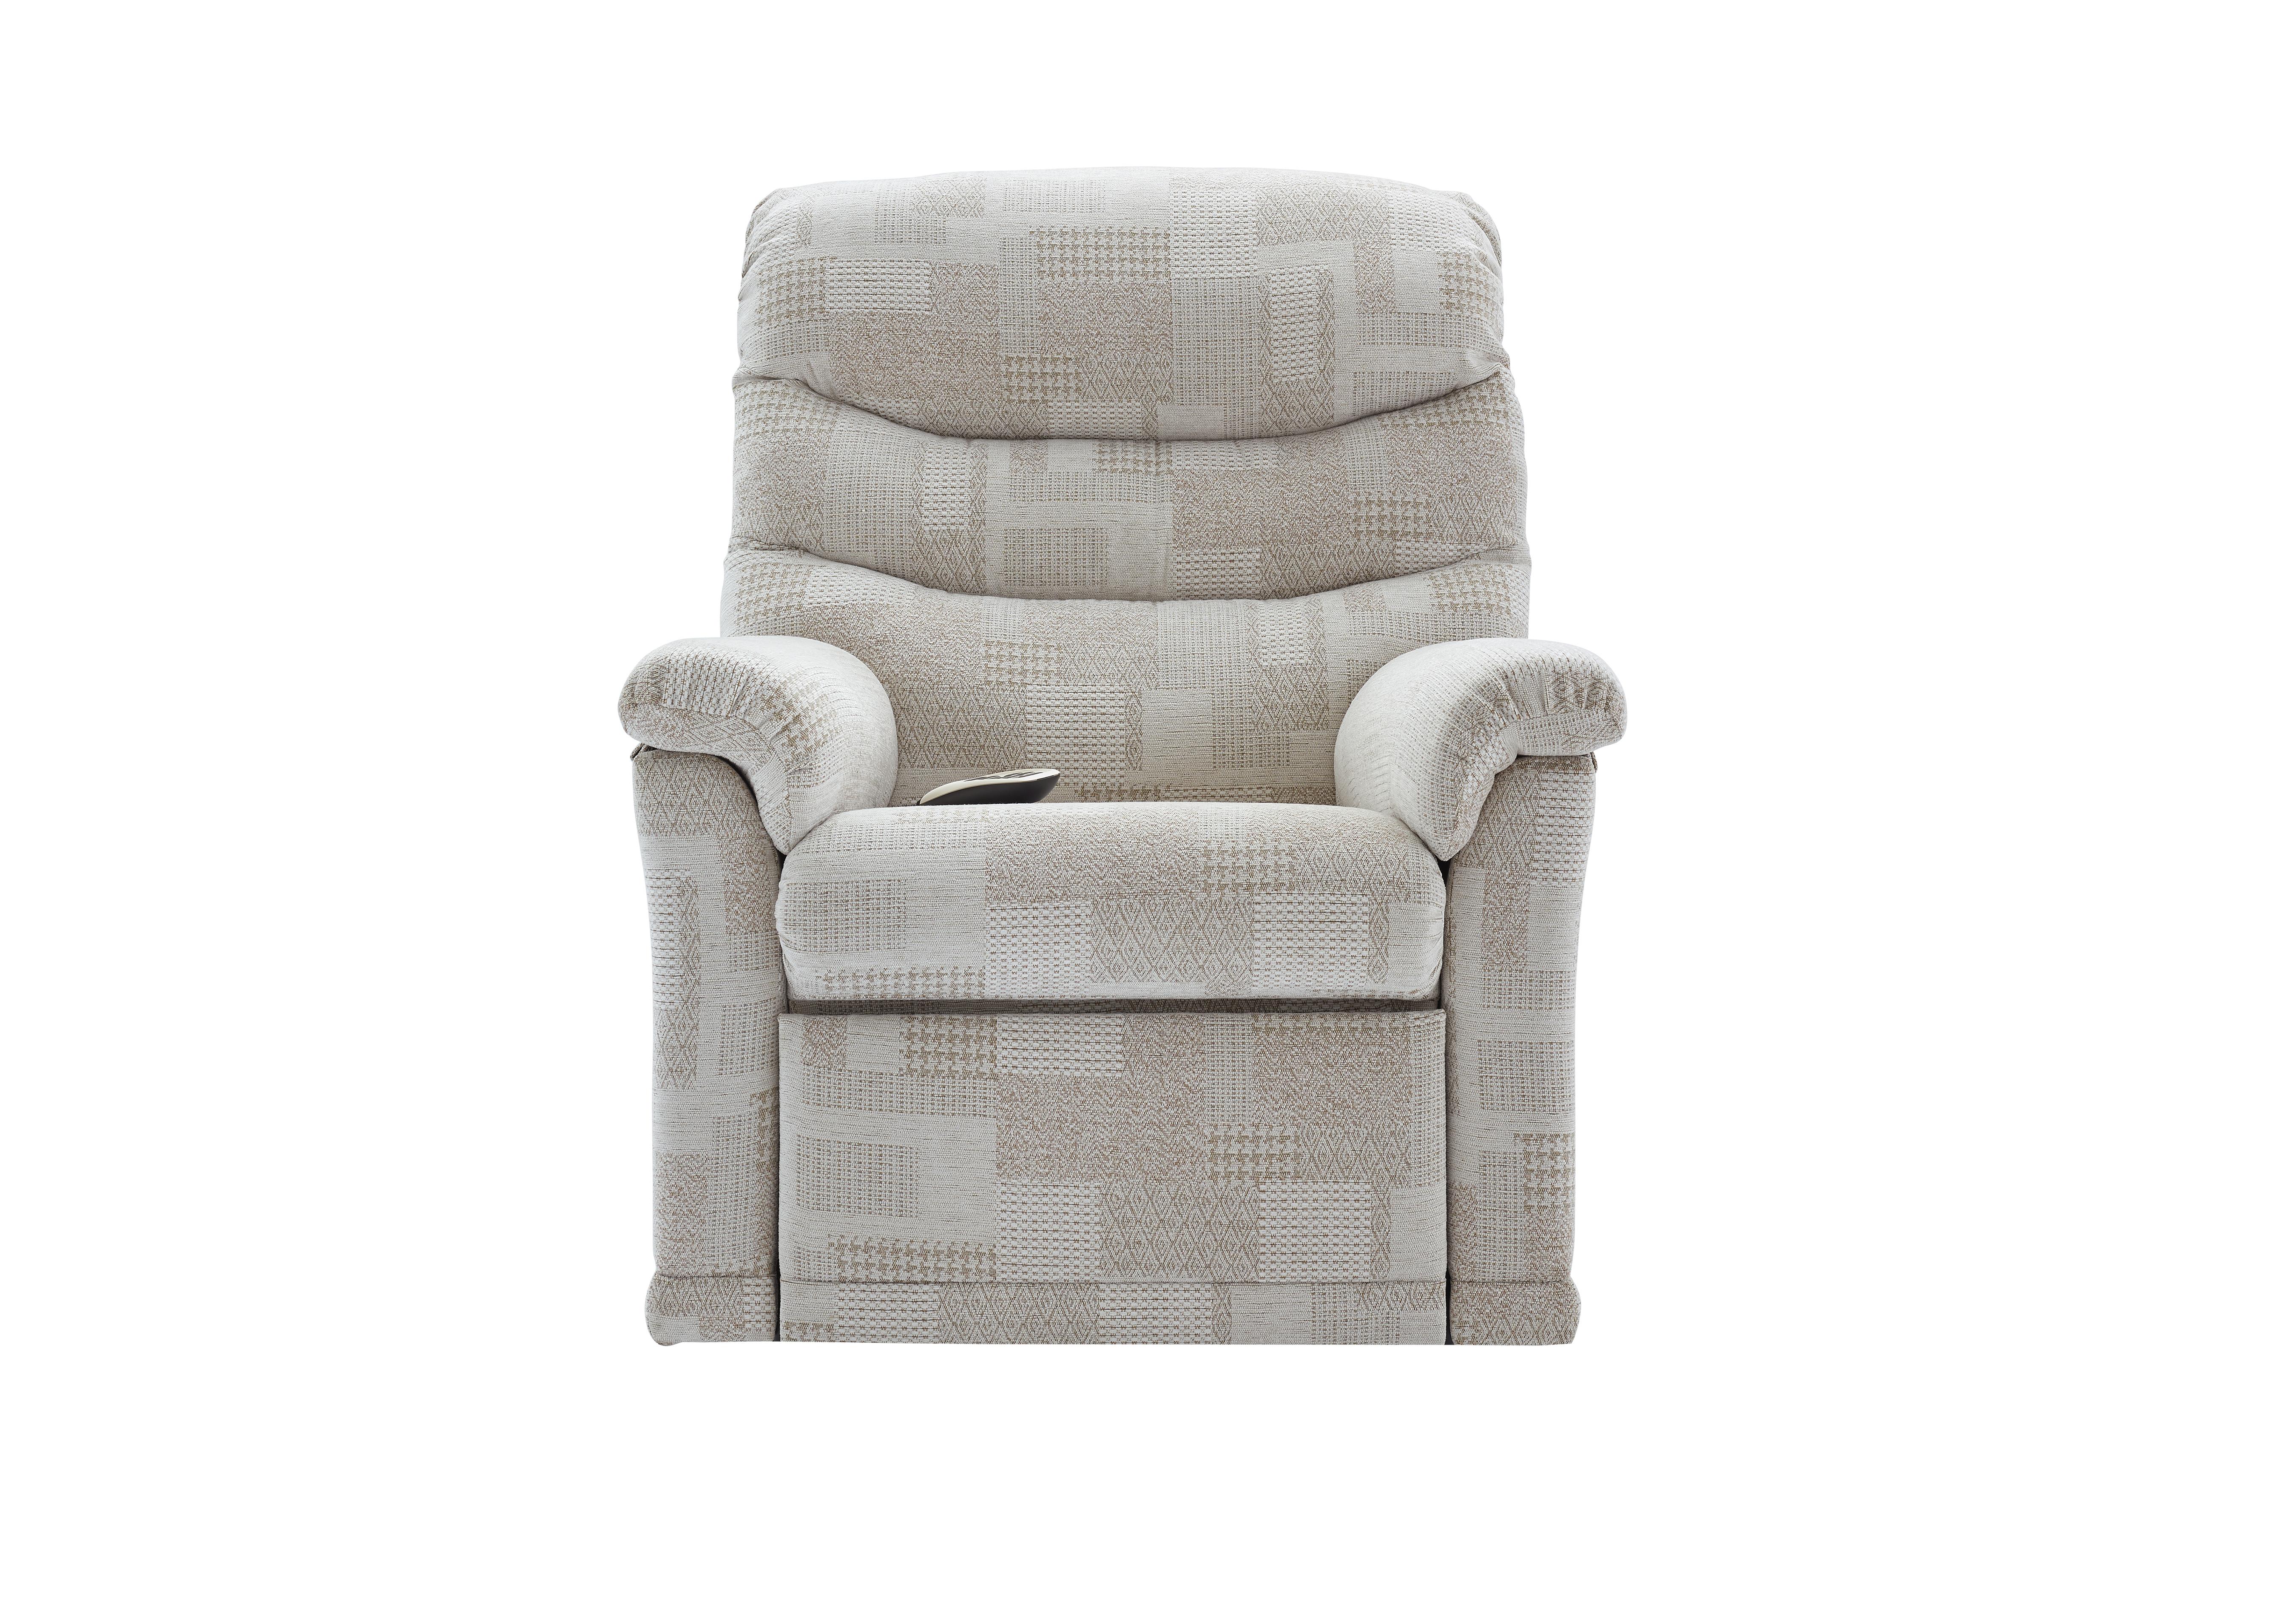 Malvern Fabric Small Rise and Recline Armchair in B342 Lydia Blush on Furniture Village